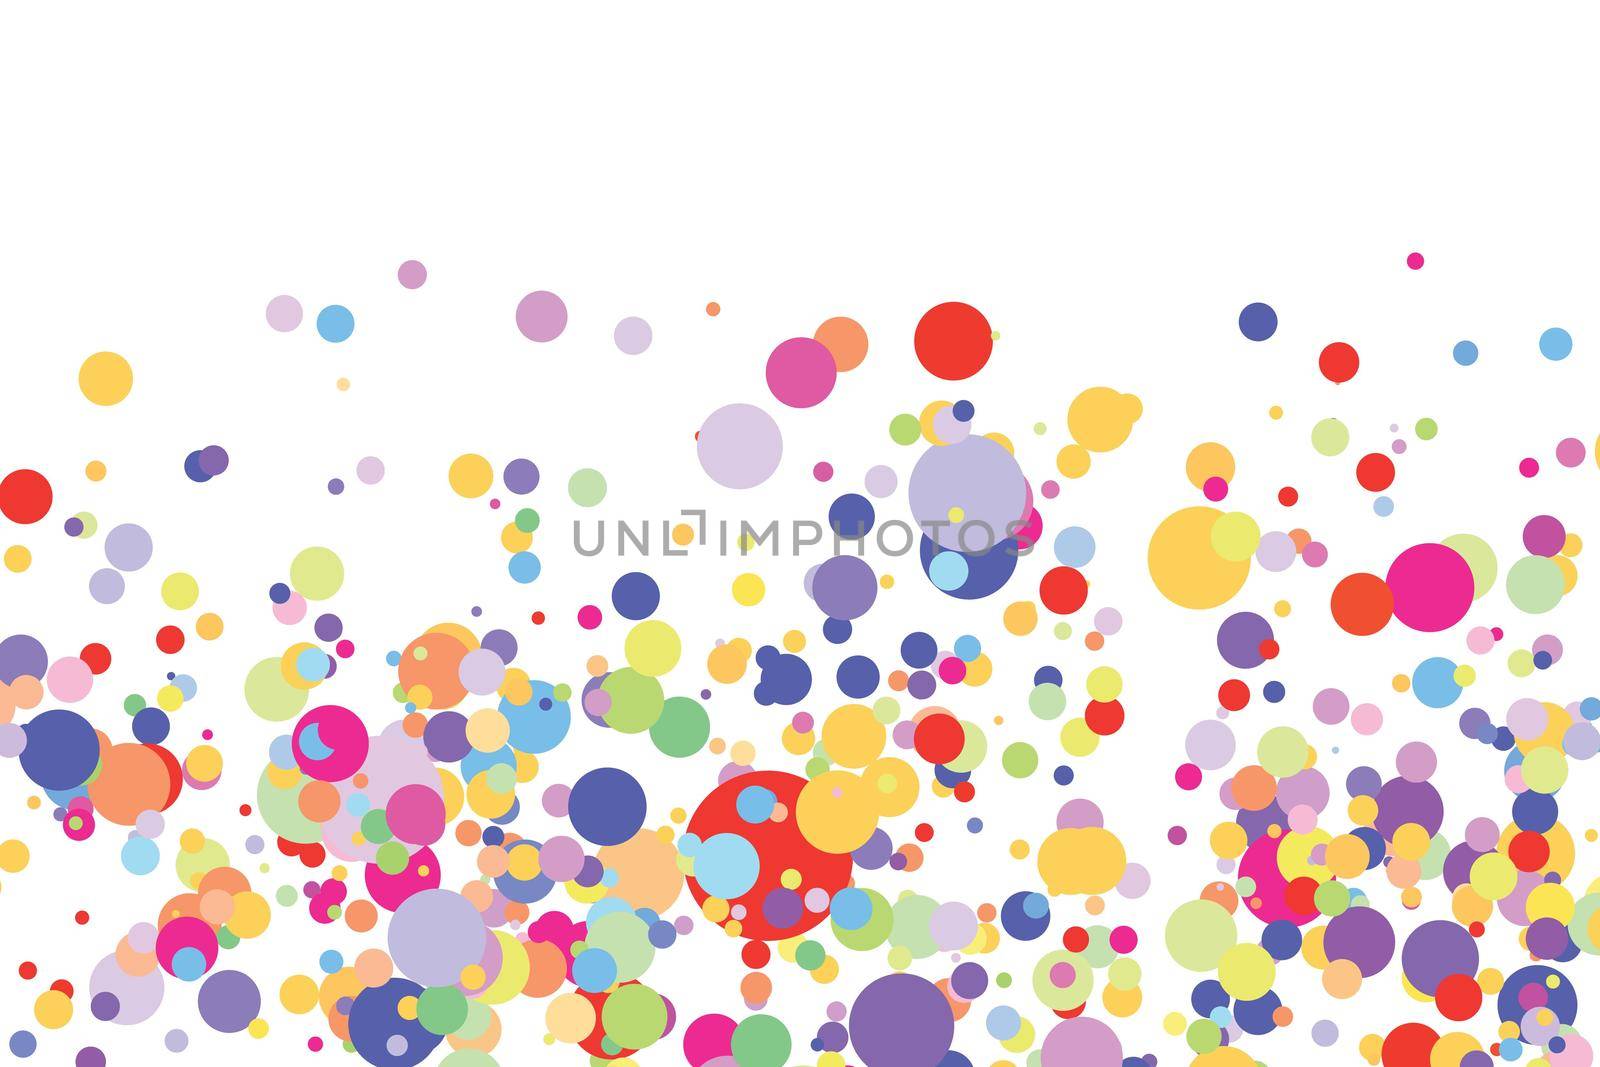 Light multicolor background, colorful vector texture with circles. Splash effect banner. Glitter silver dot abstract illustration with blurred drops of rain. Pattern for web page, banner, poster, card